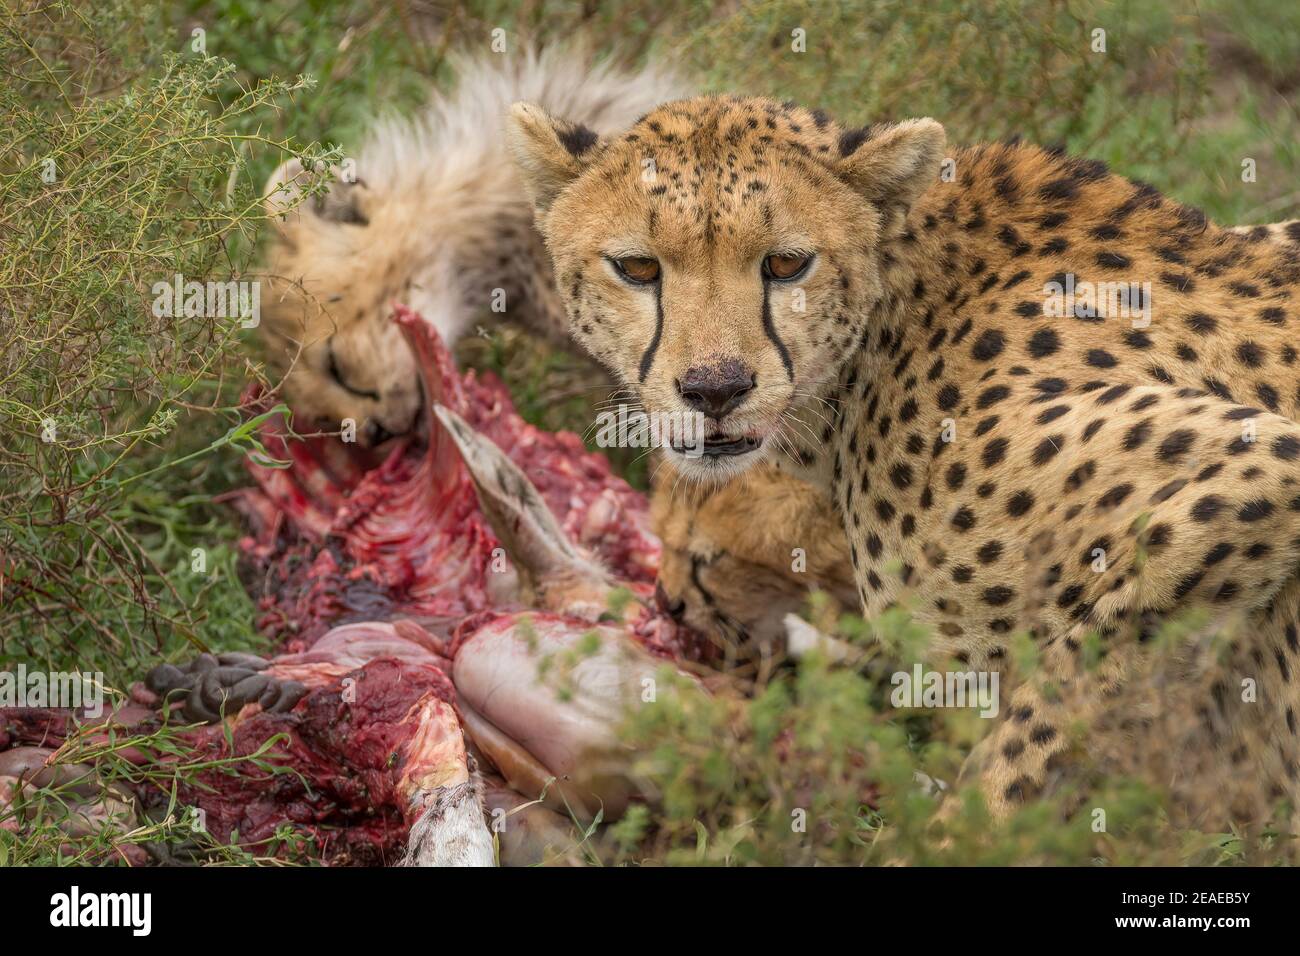 A mother cheetah and her cub feeding on a kill in Africa. Stock Photo